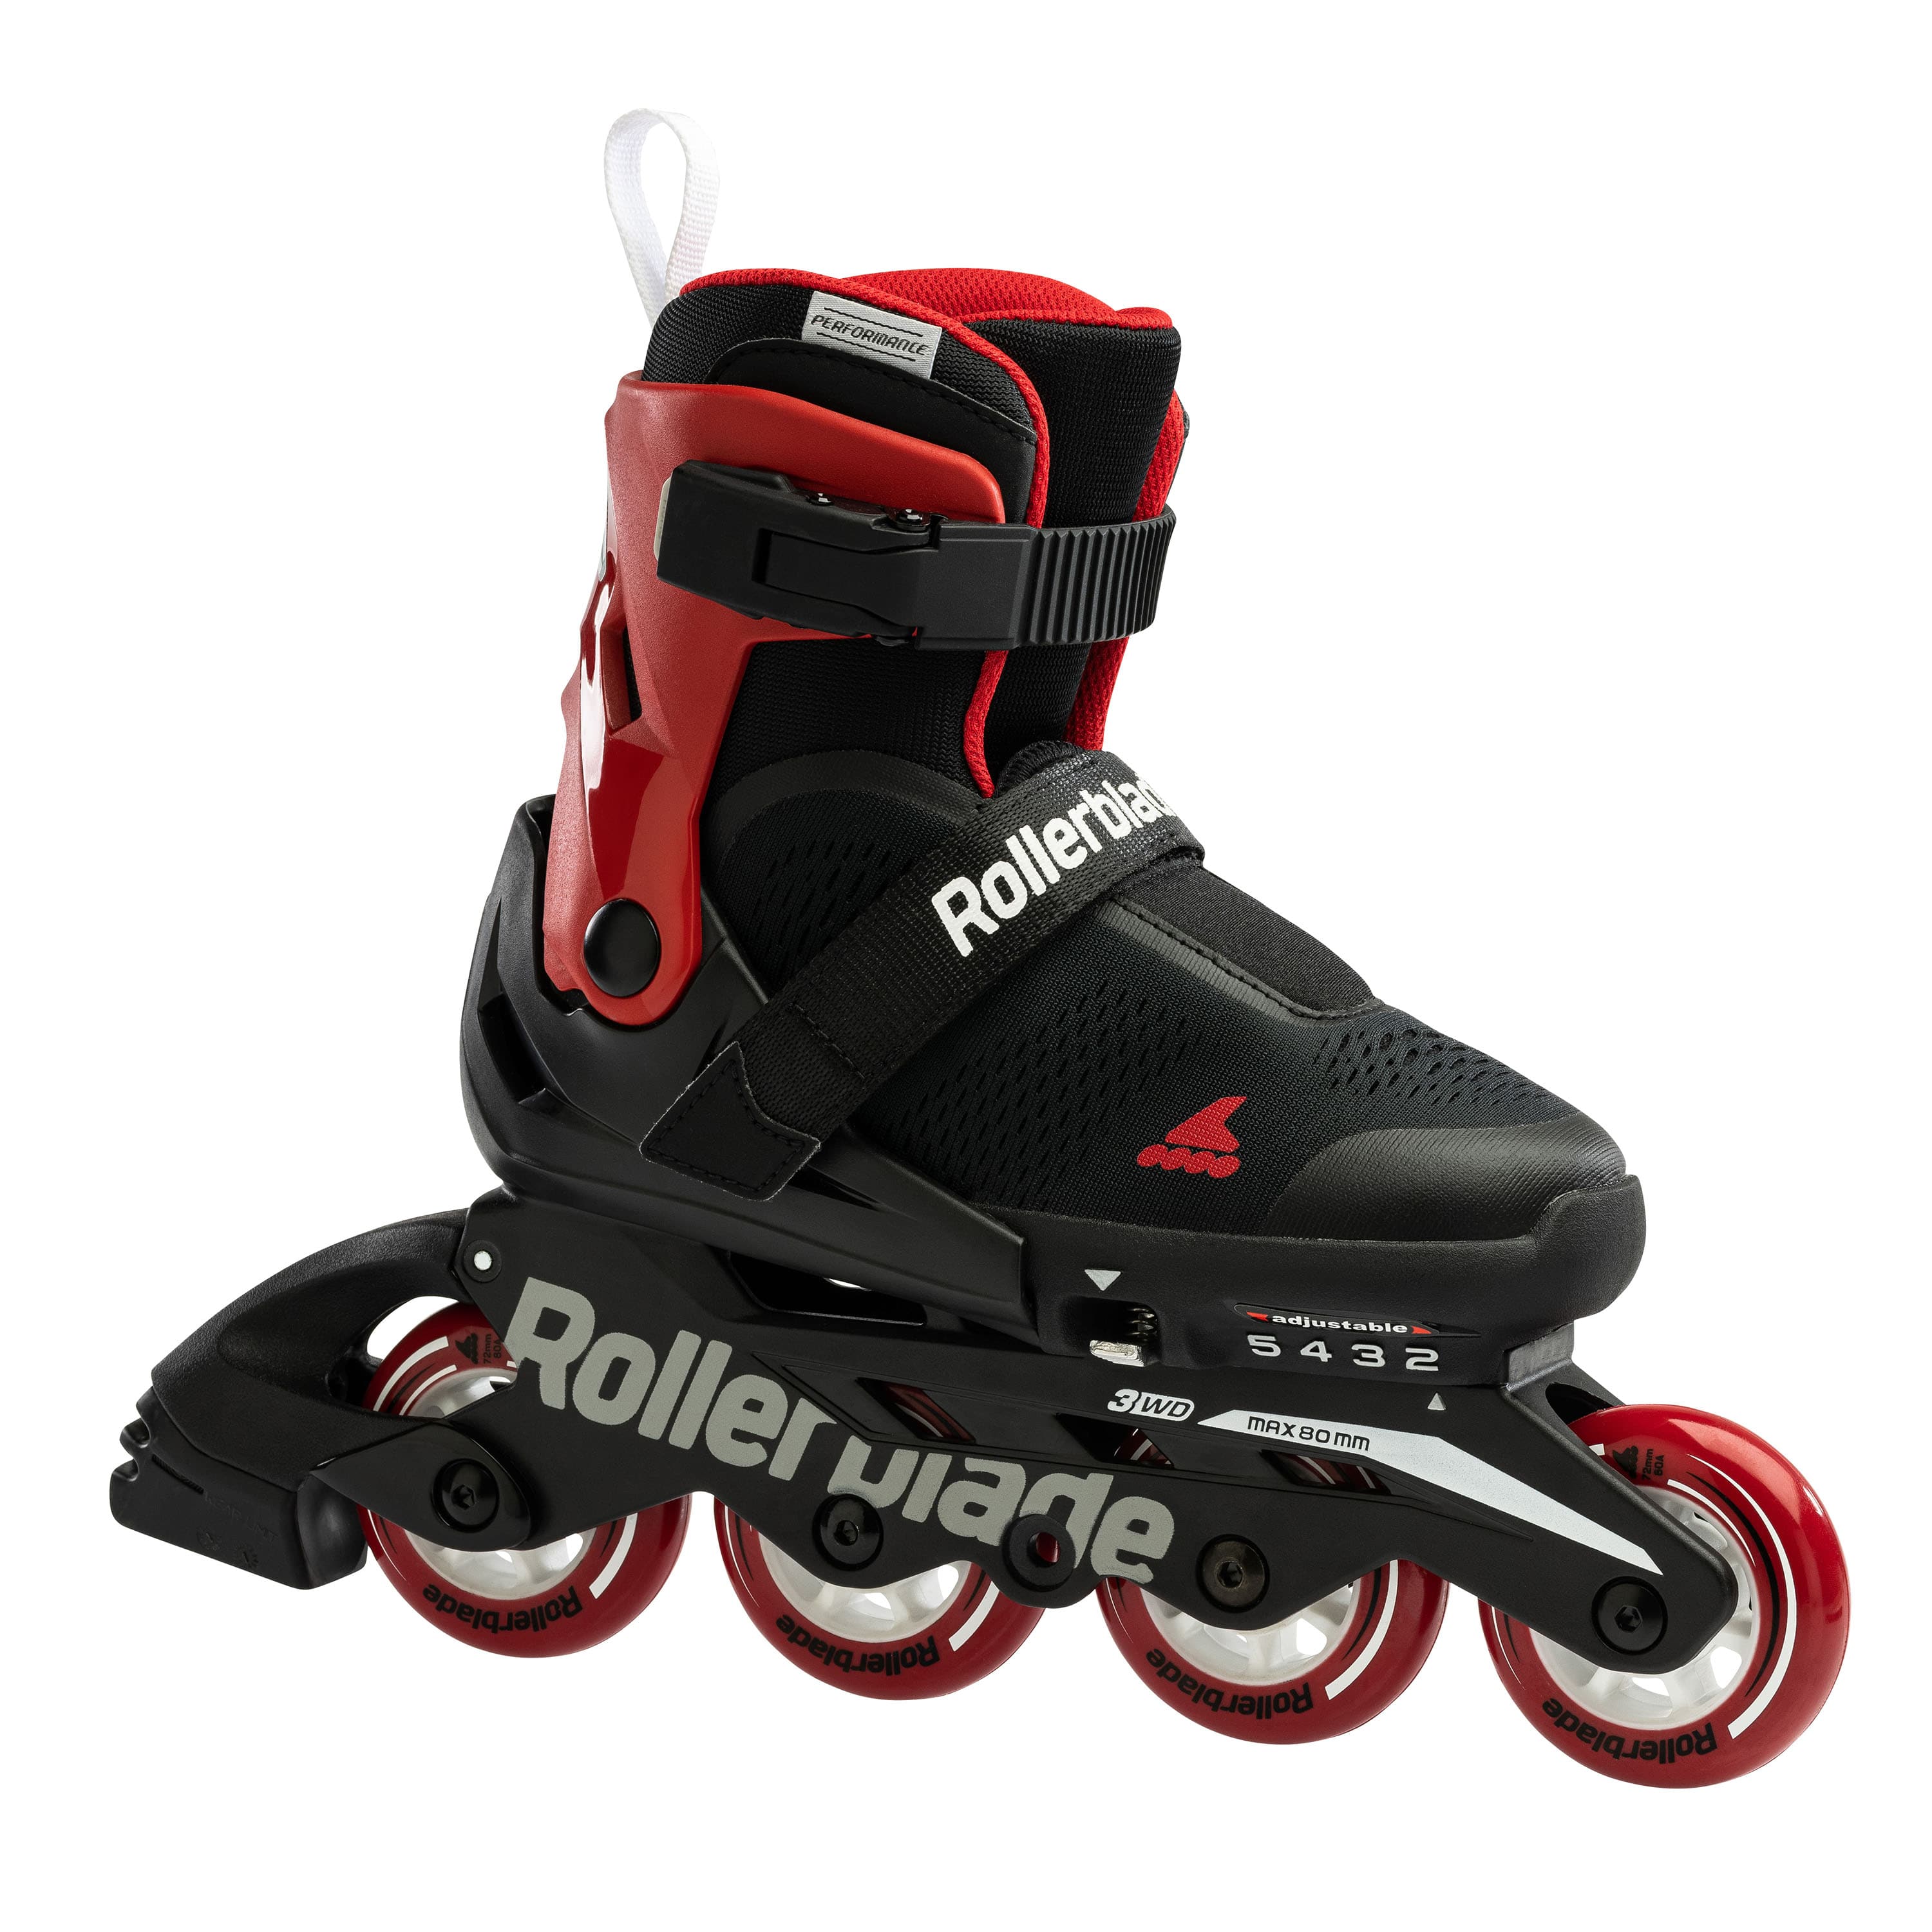 Rollerblade MICROBLADE FREE